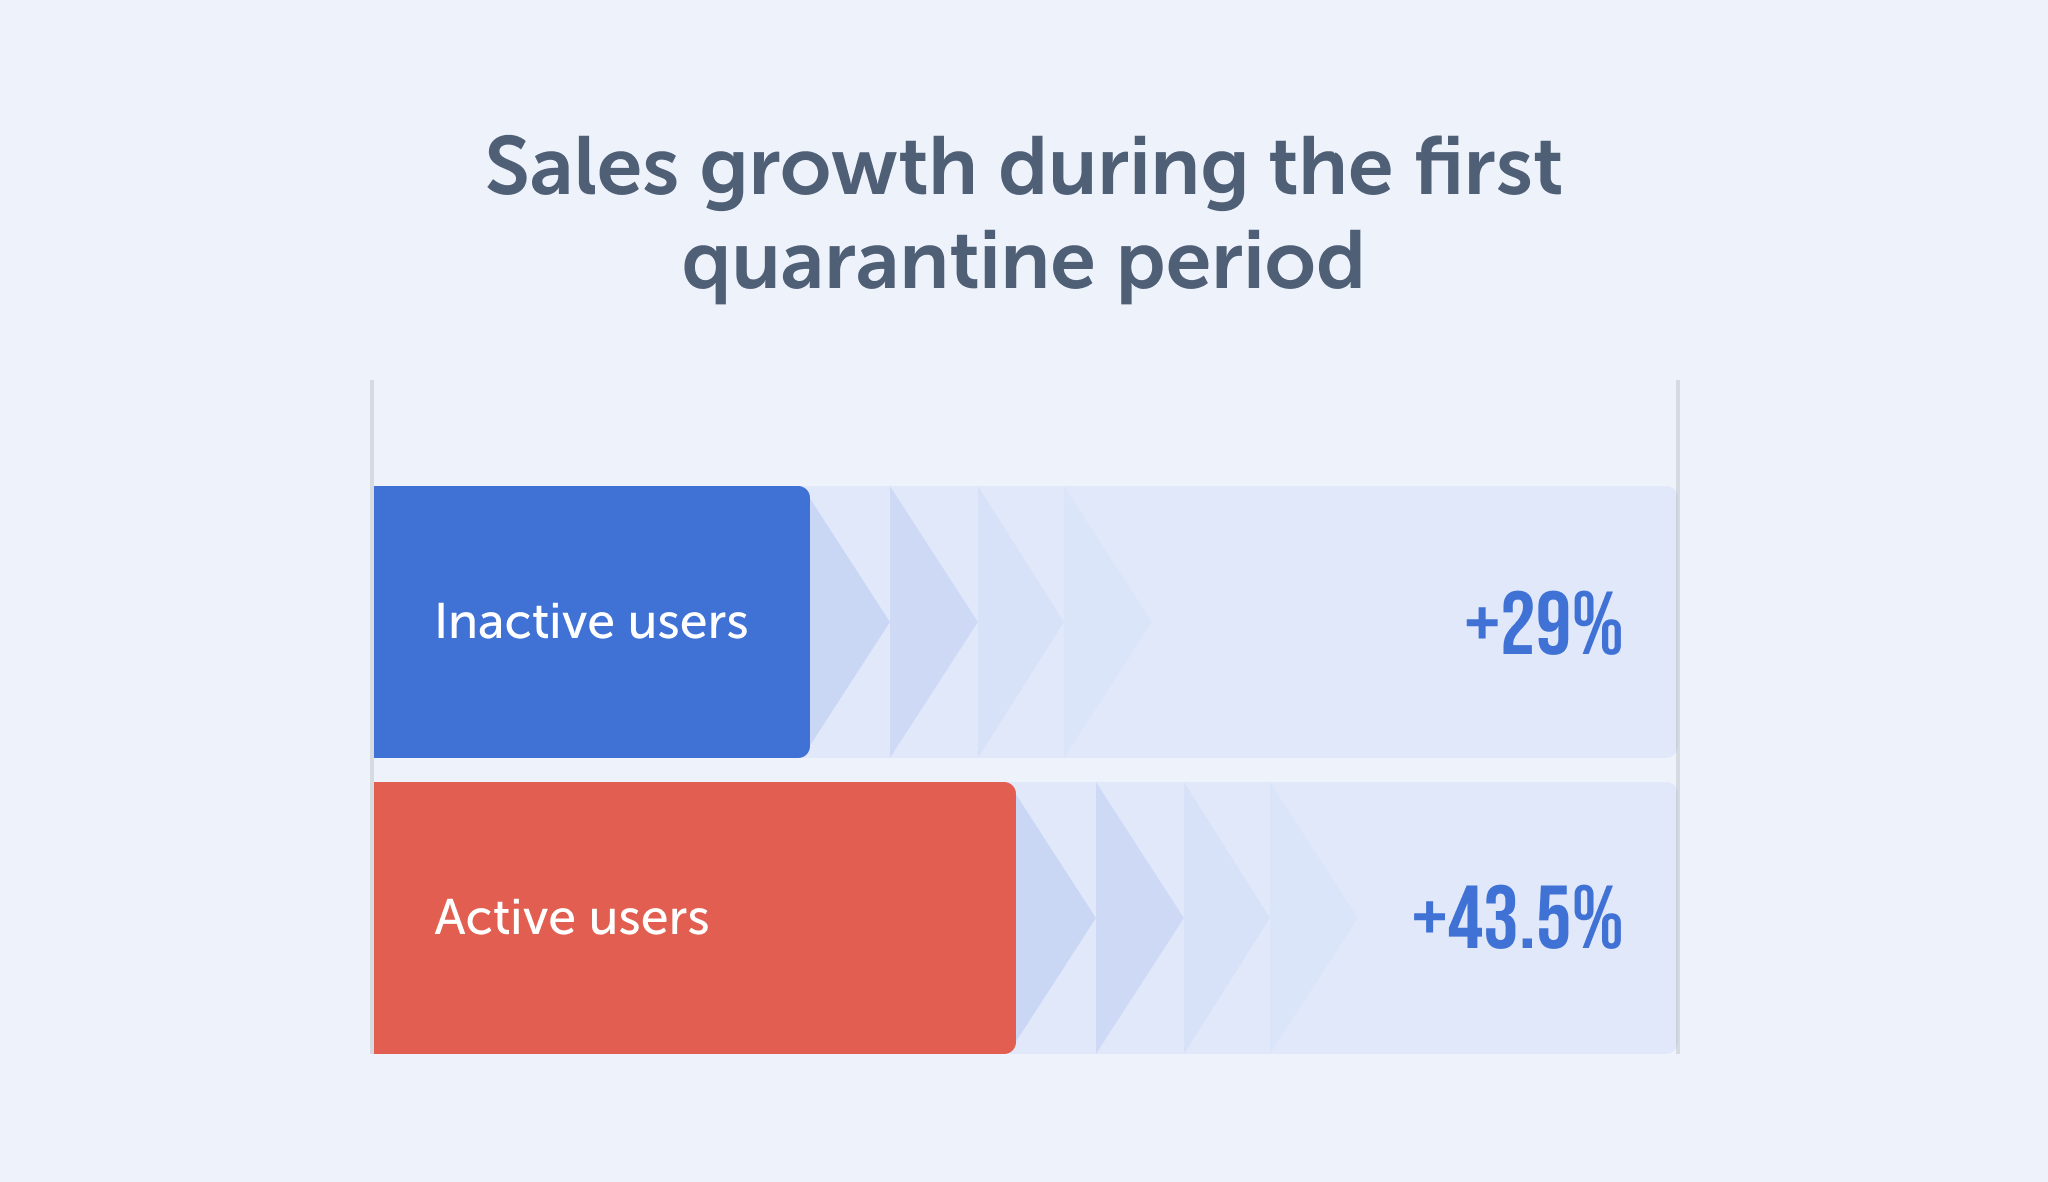 direct selling sales growth during the first quarantine period